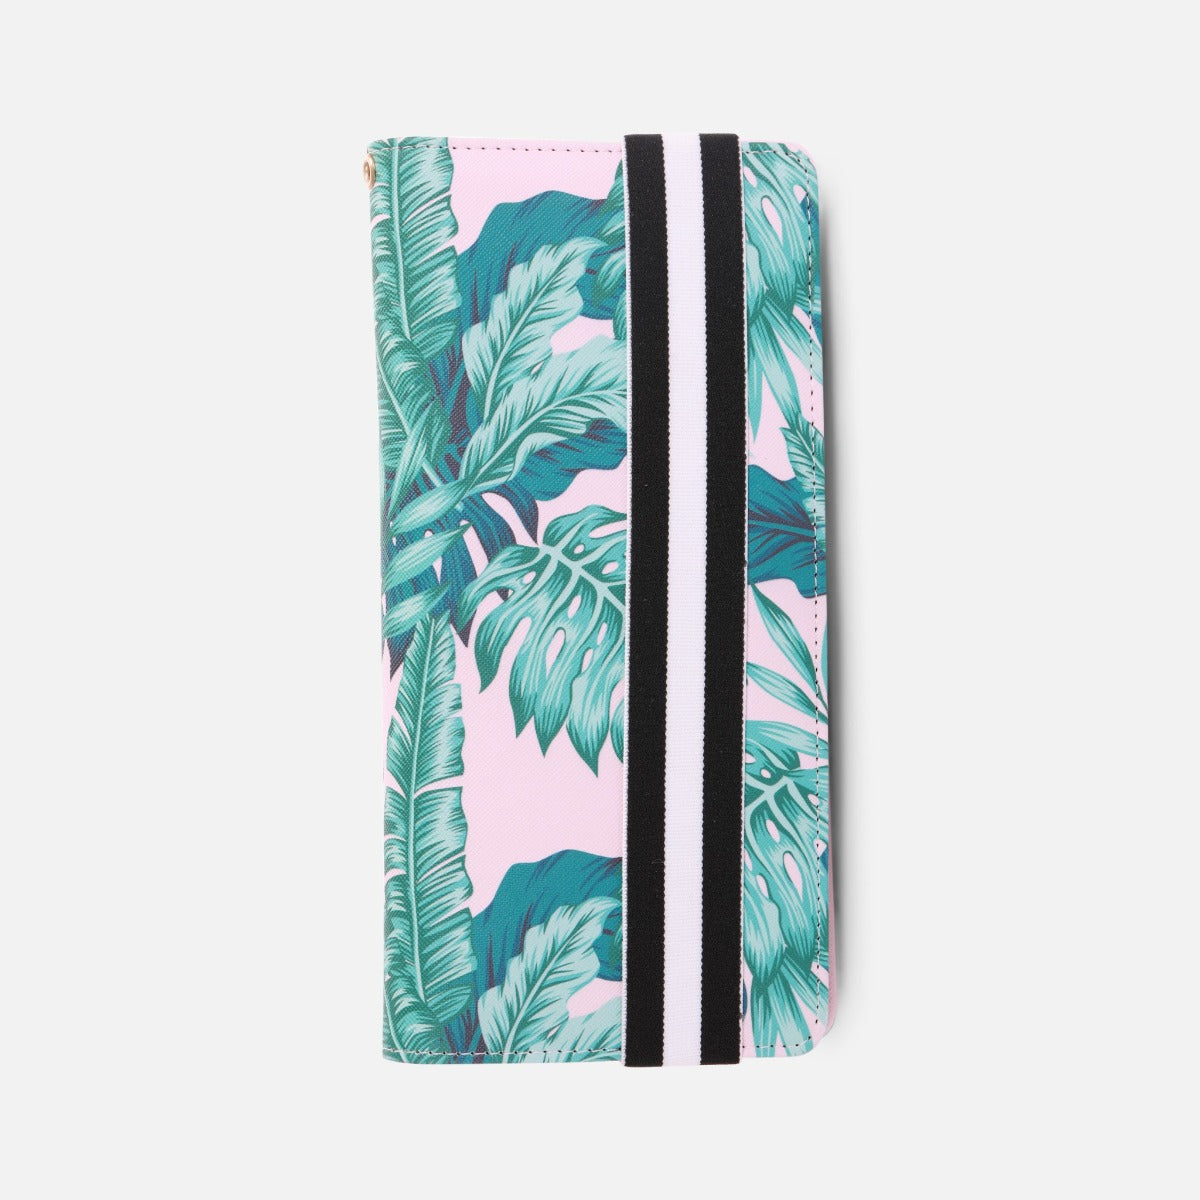 Passport case with tropical print and athletic strip